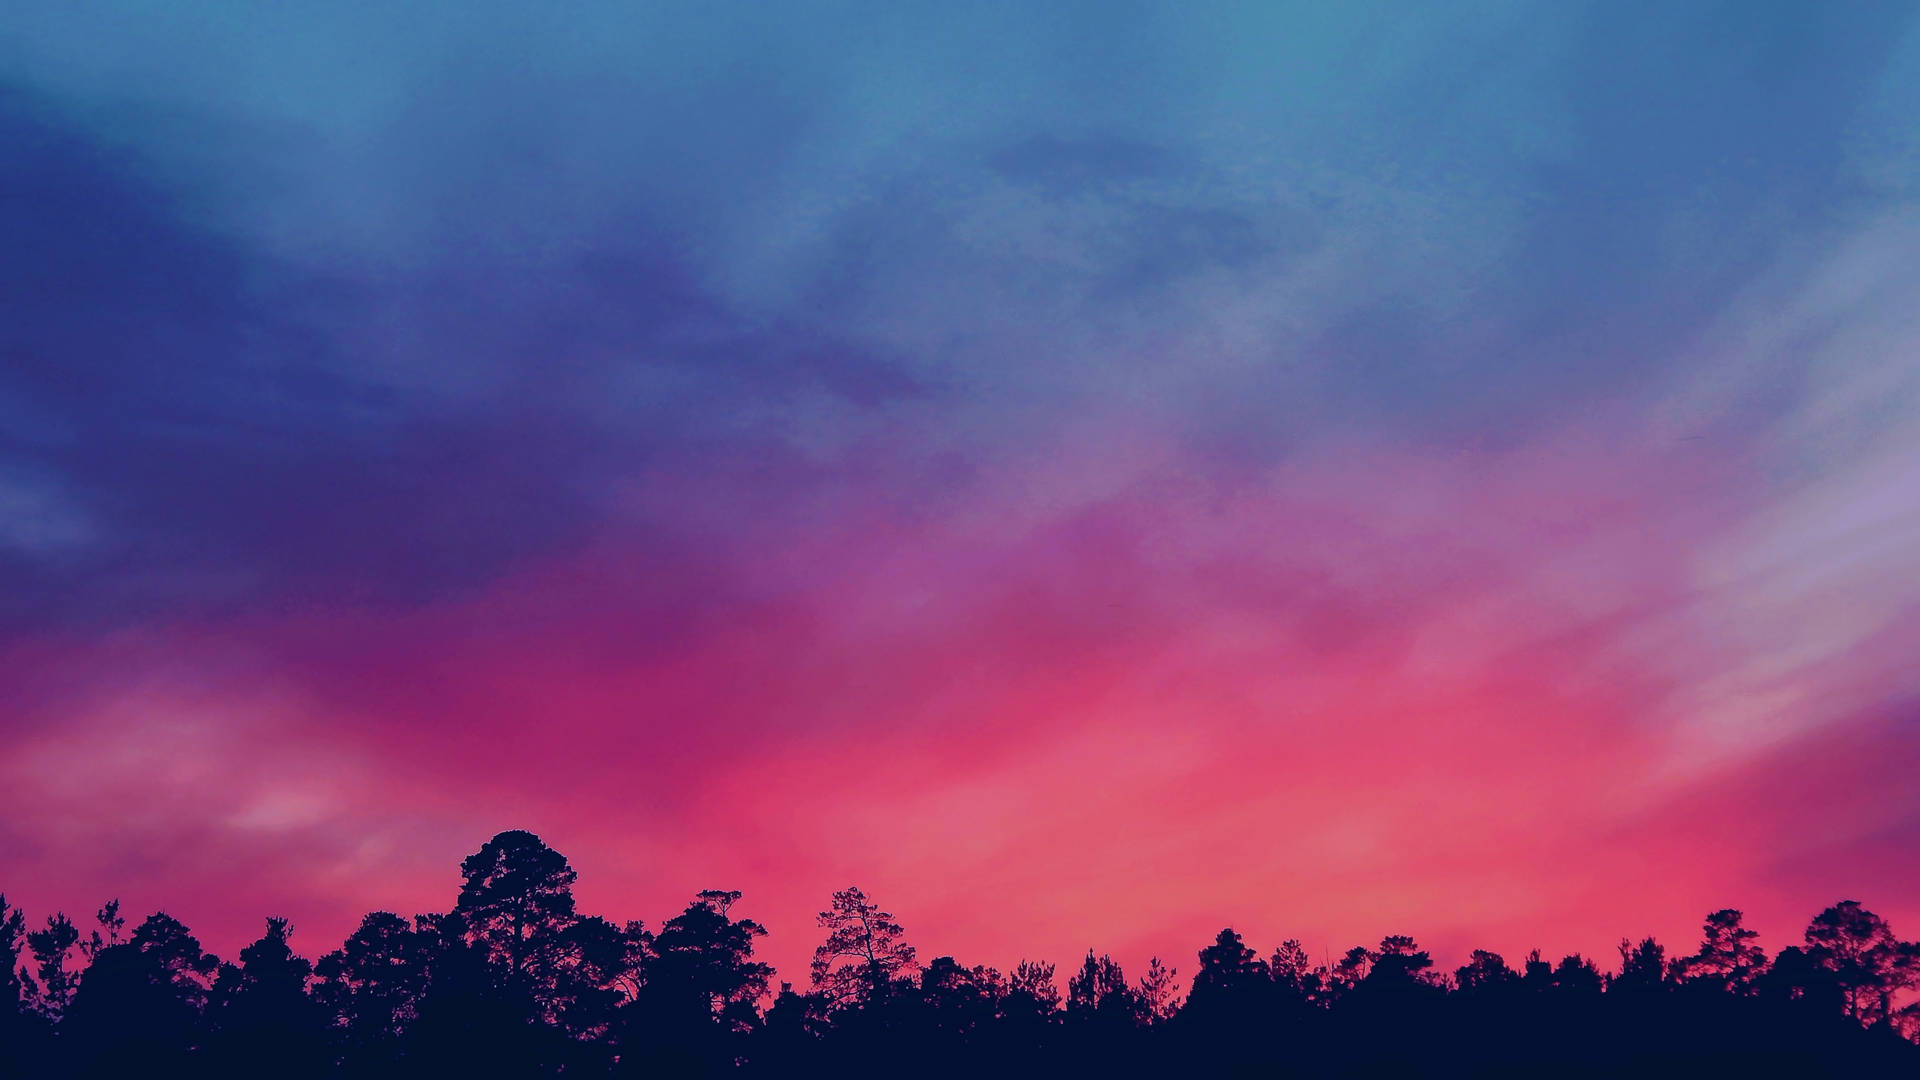 Aesthetic Sky In Pink And Blue Background